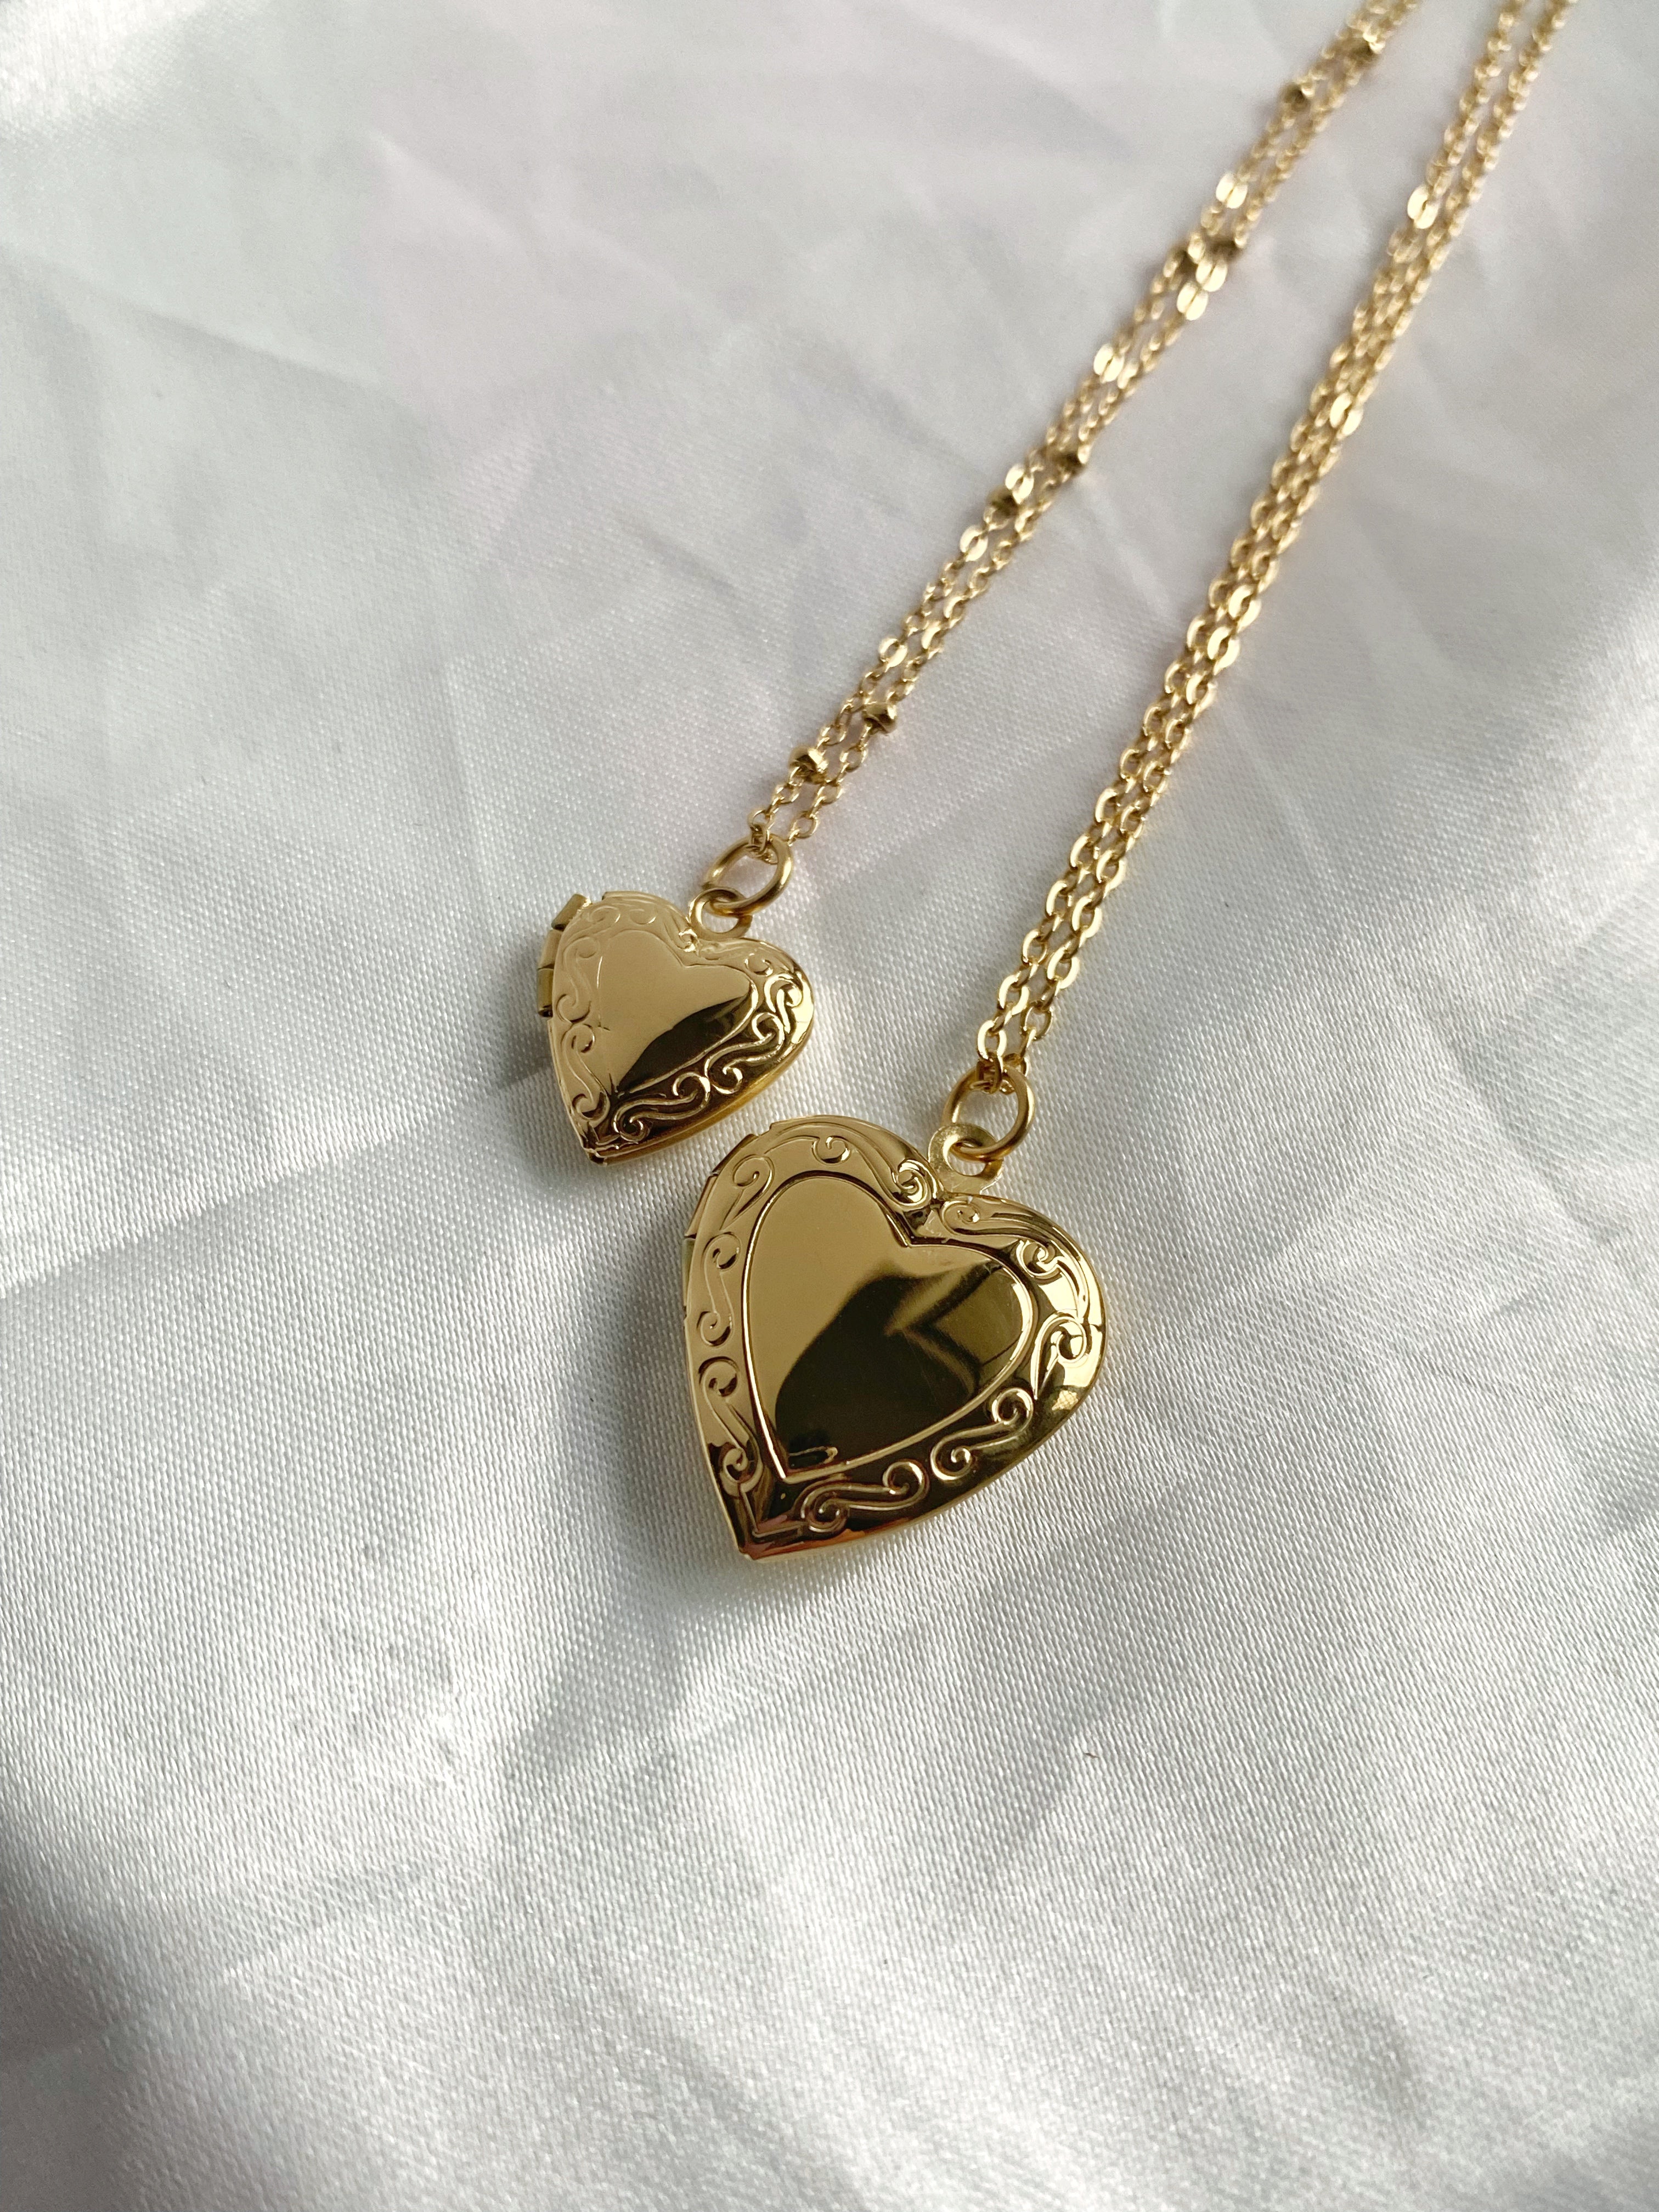 THE HEART LOCKET CUSTOM ENGRAVED NECKLACE - Esah and Co